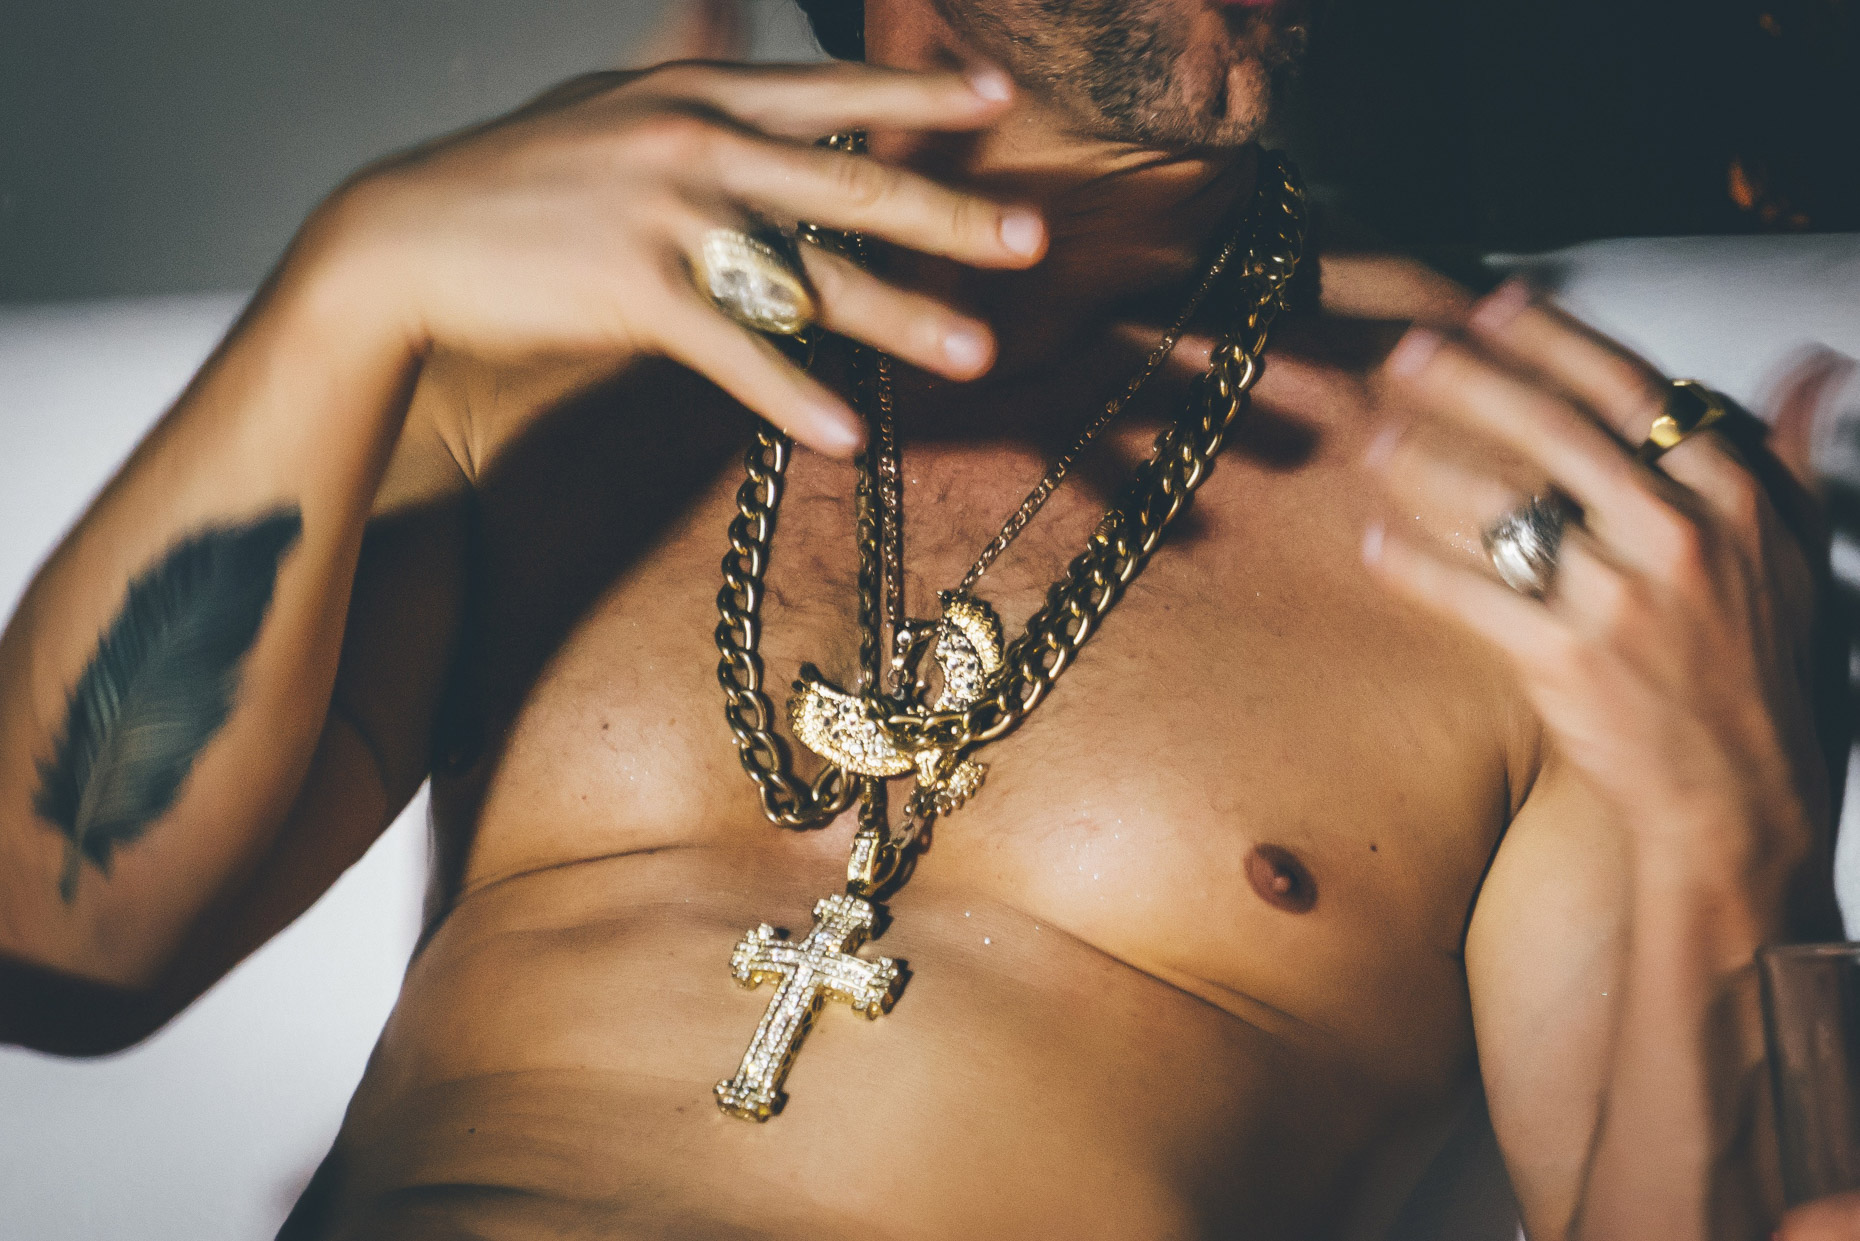 Naked male torso wearing diamond and gold necklaces with cross and eagle charms